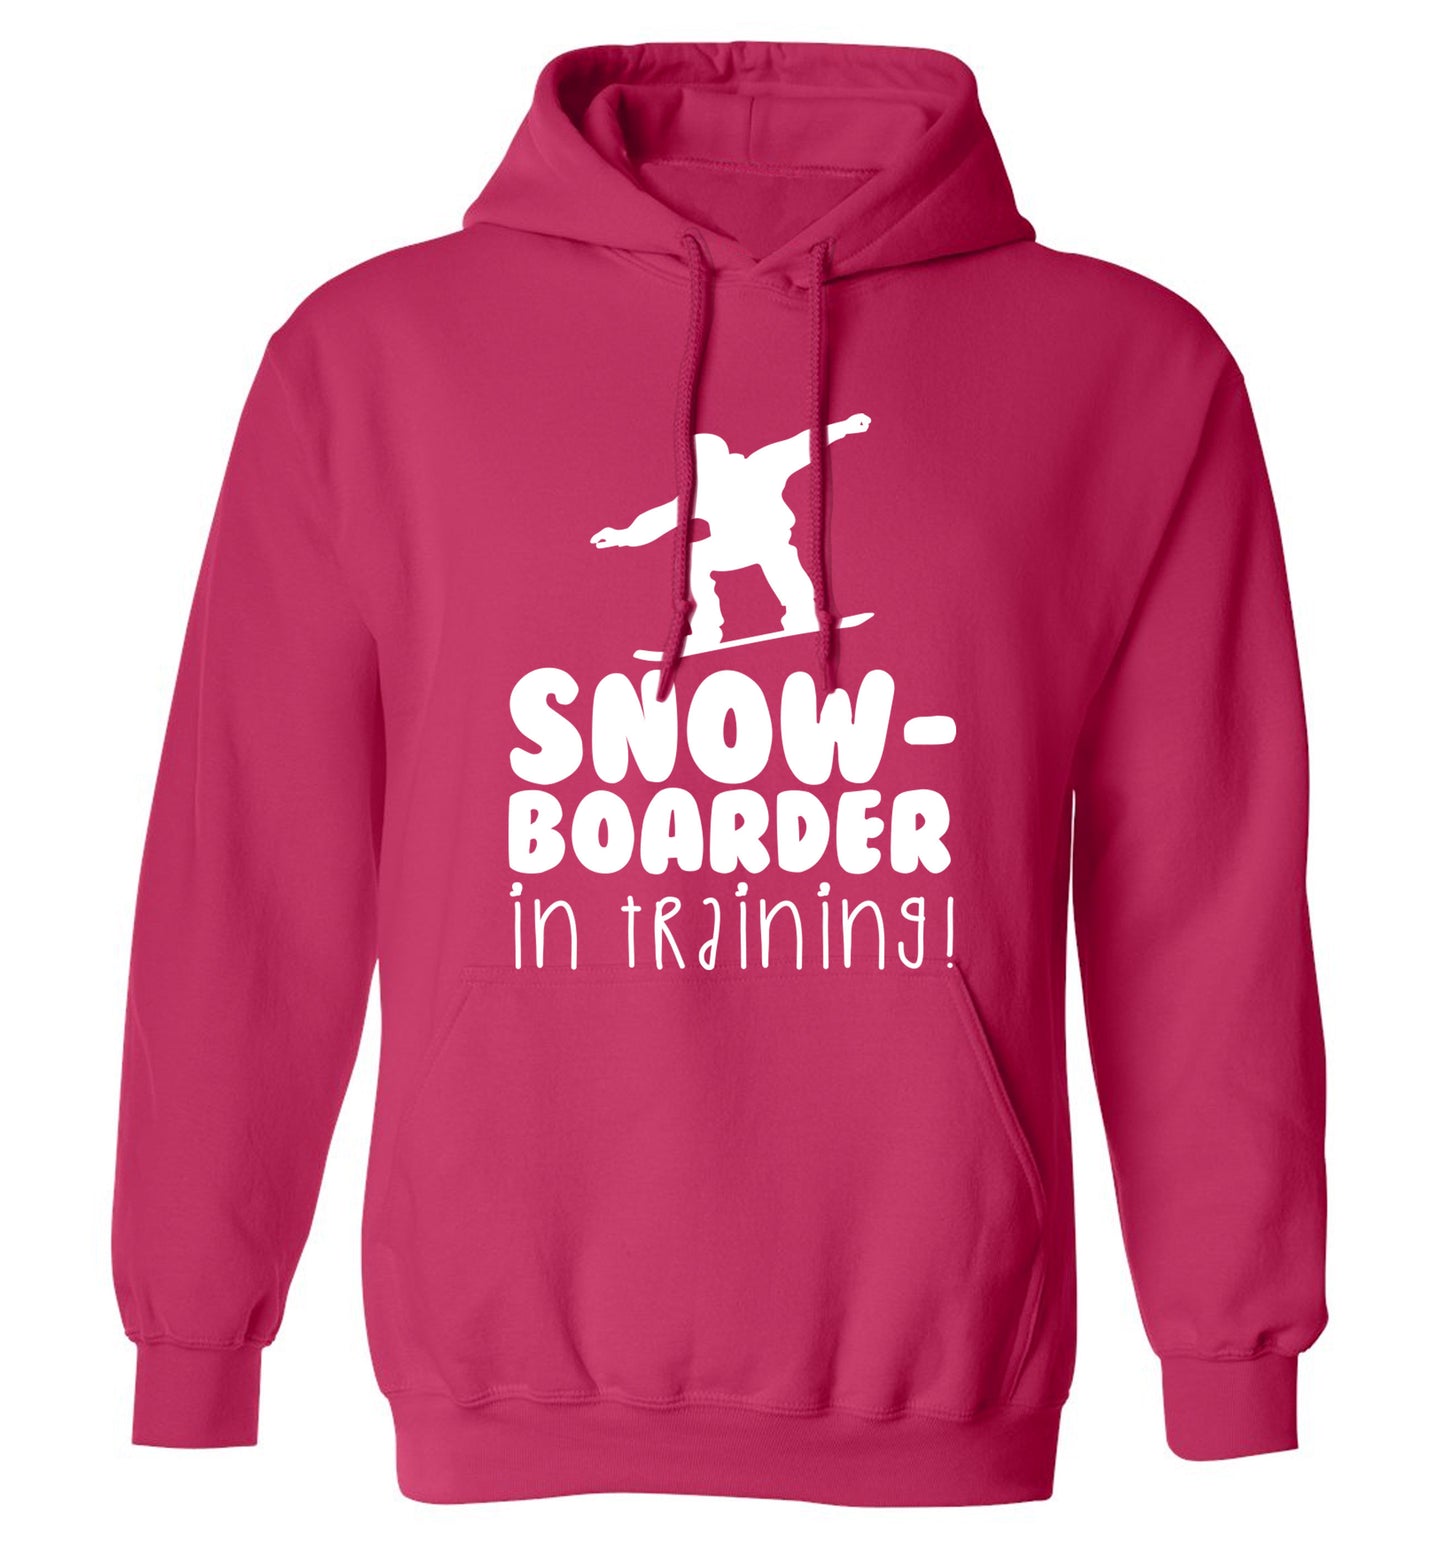 Snowboarder in training adults unisex pink hoodie 2XL